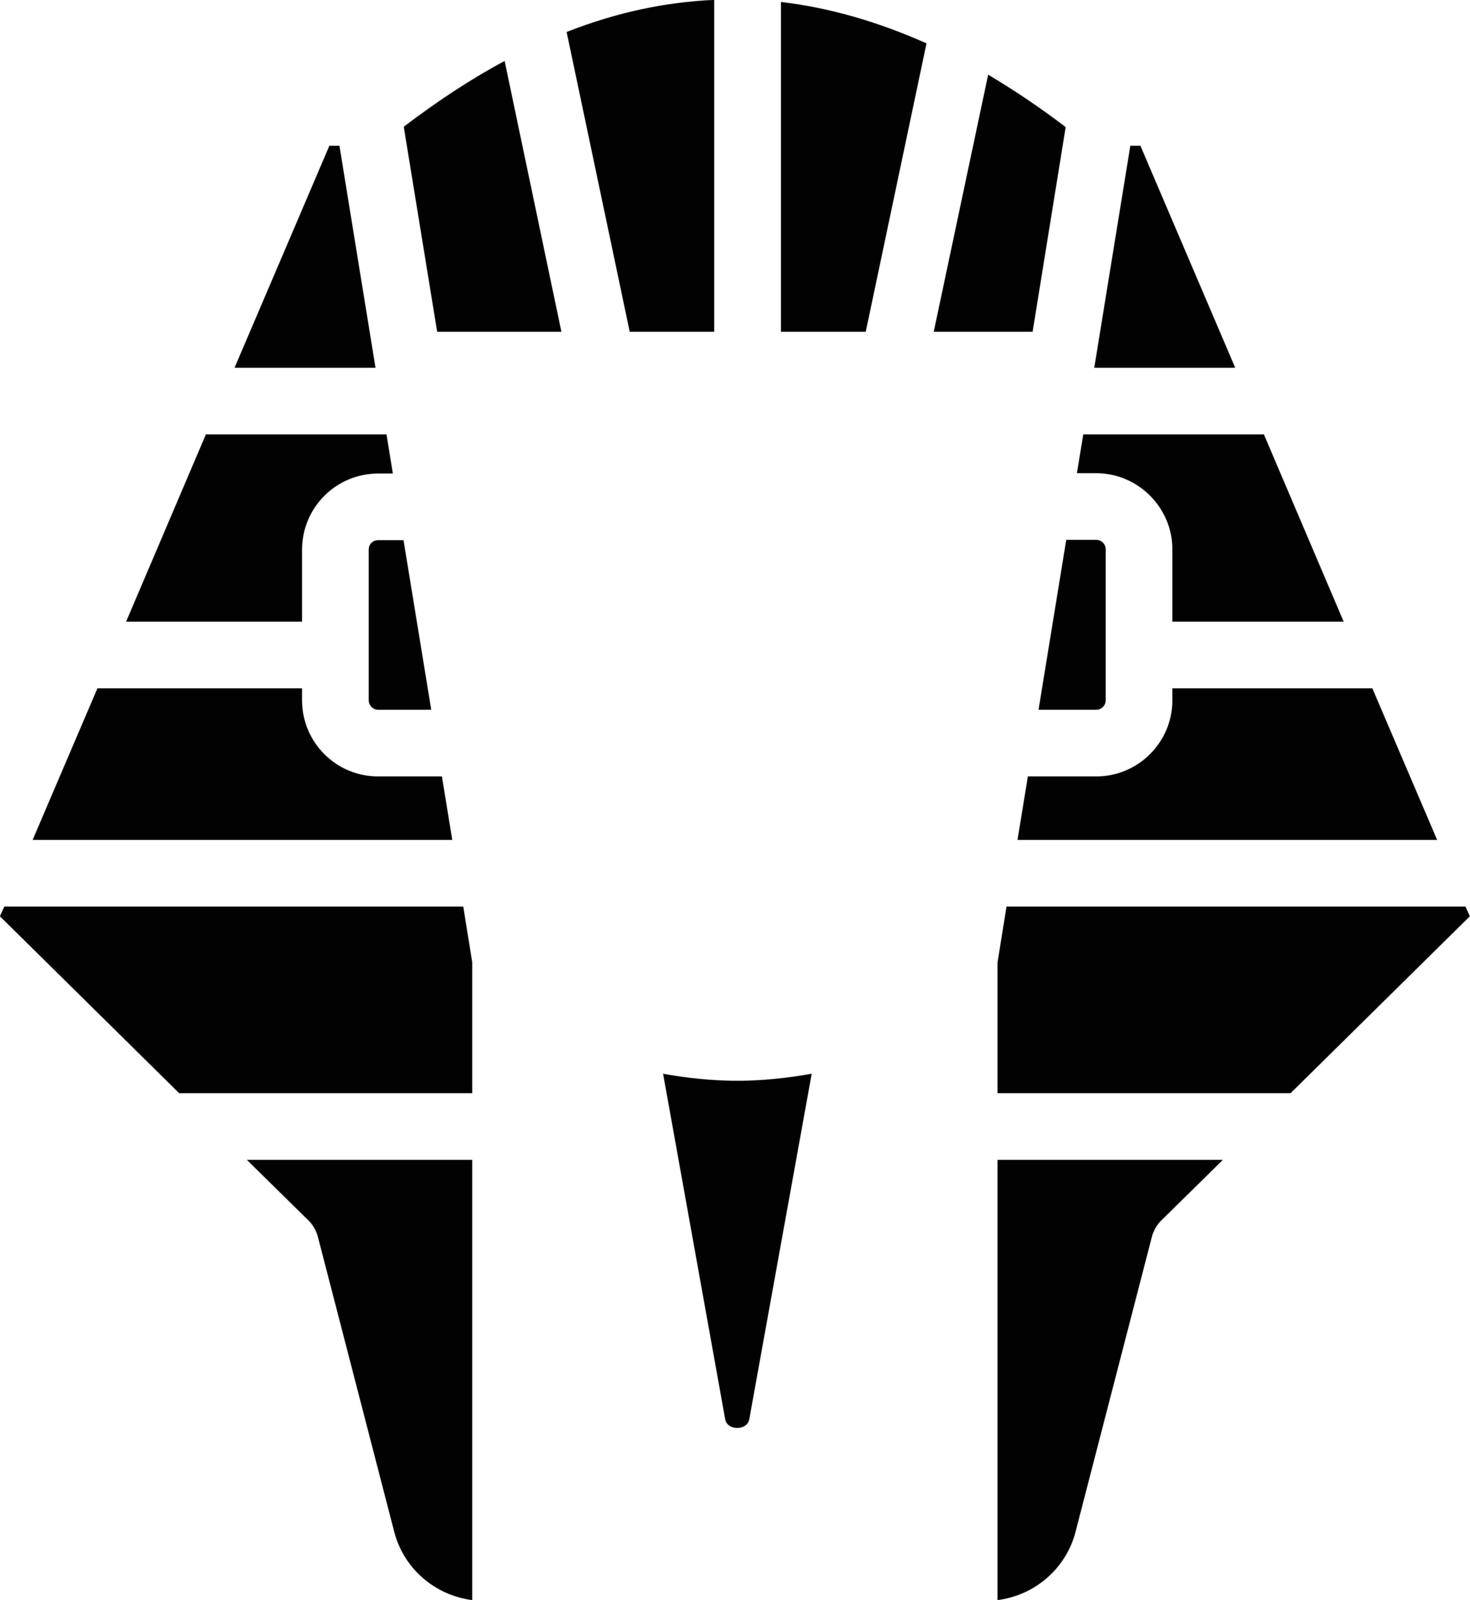 pharaoh Vector illustration on a transparent background. Premium quality symmbols. Glyphs vector icons for concept and graphic design.